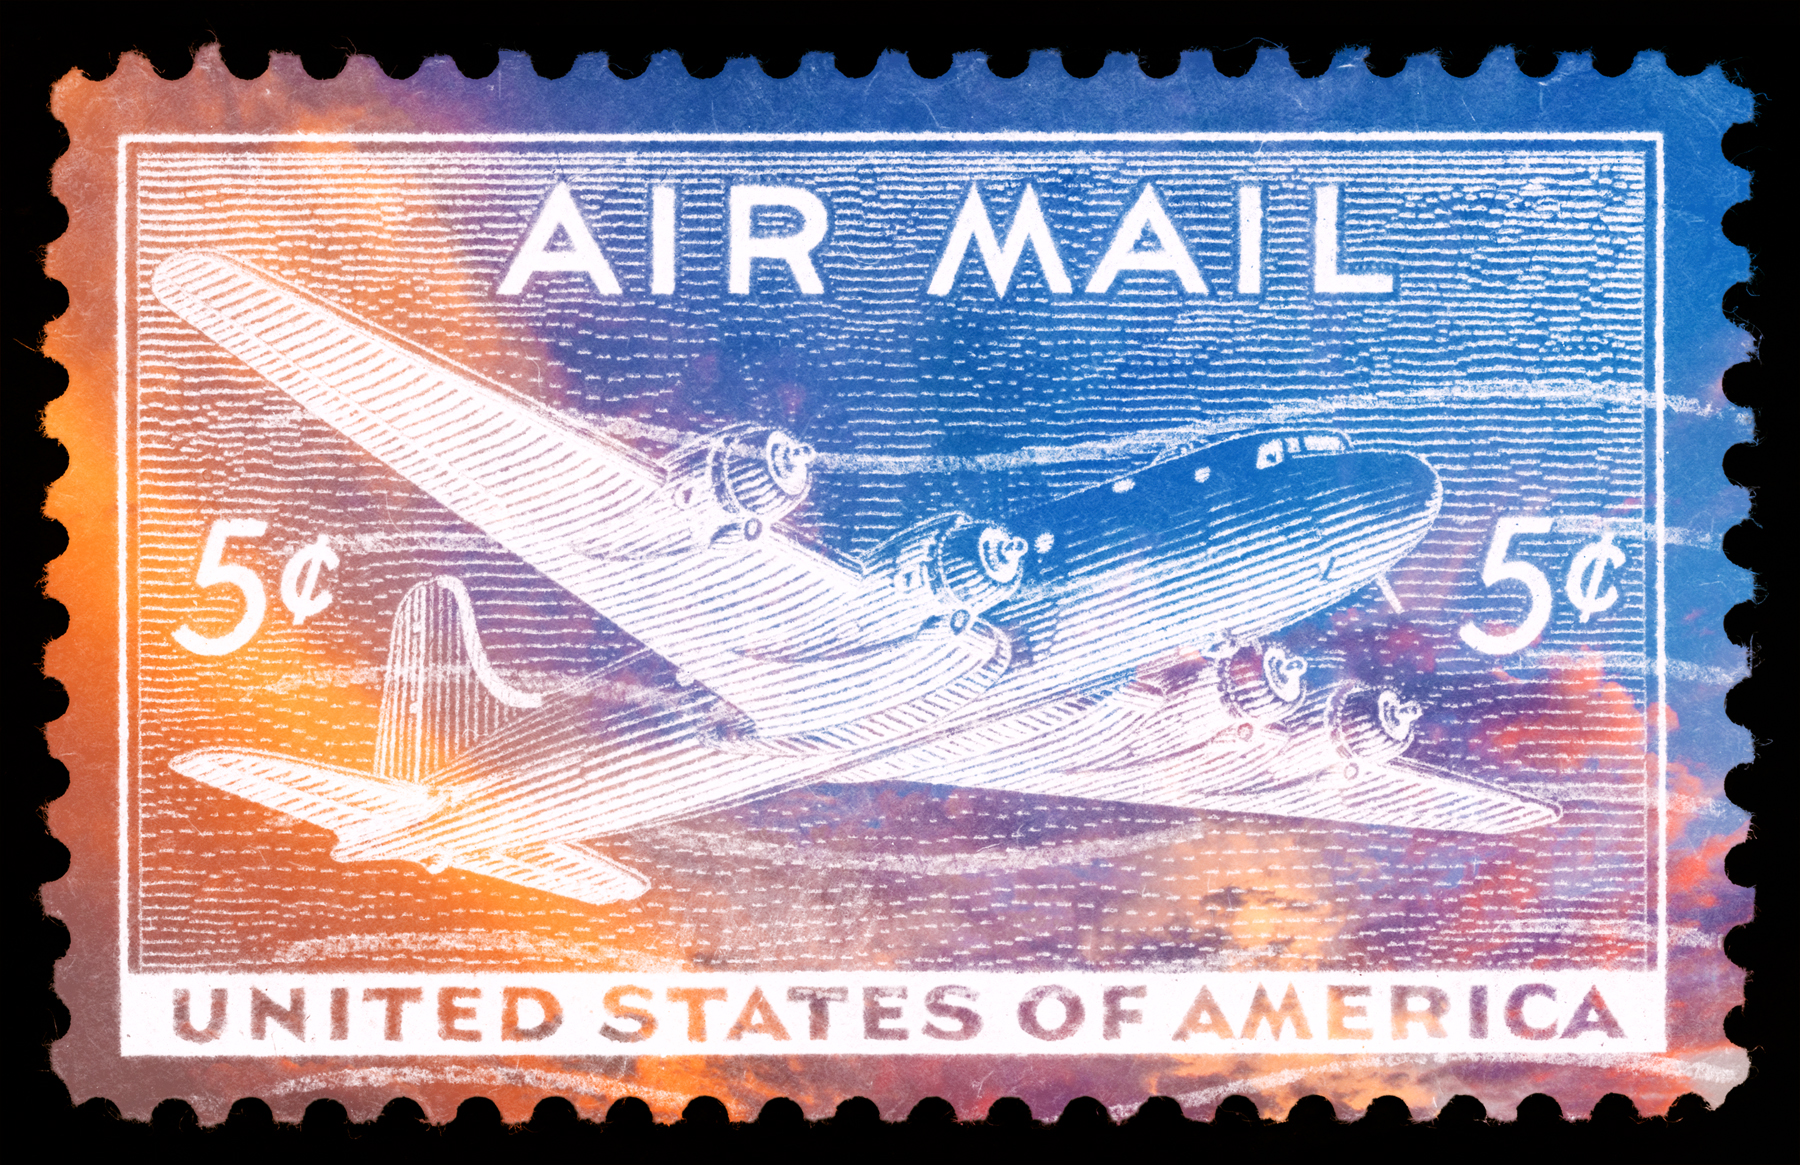 the stamp shows an airplane with an image of a man and woman